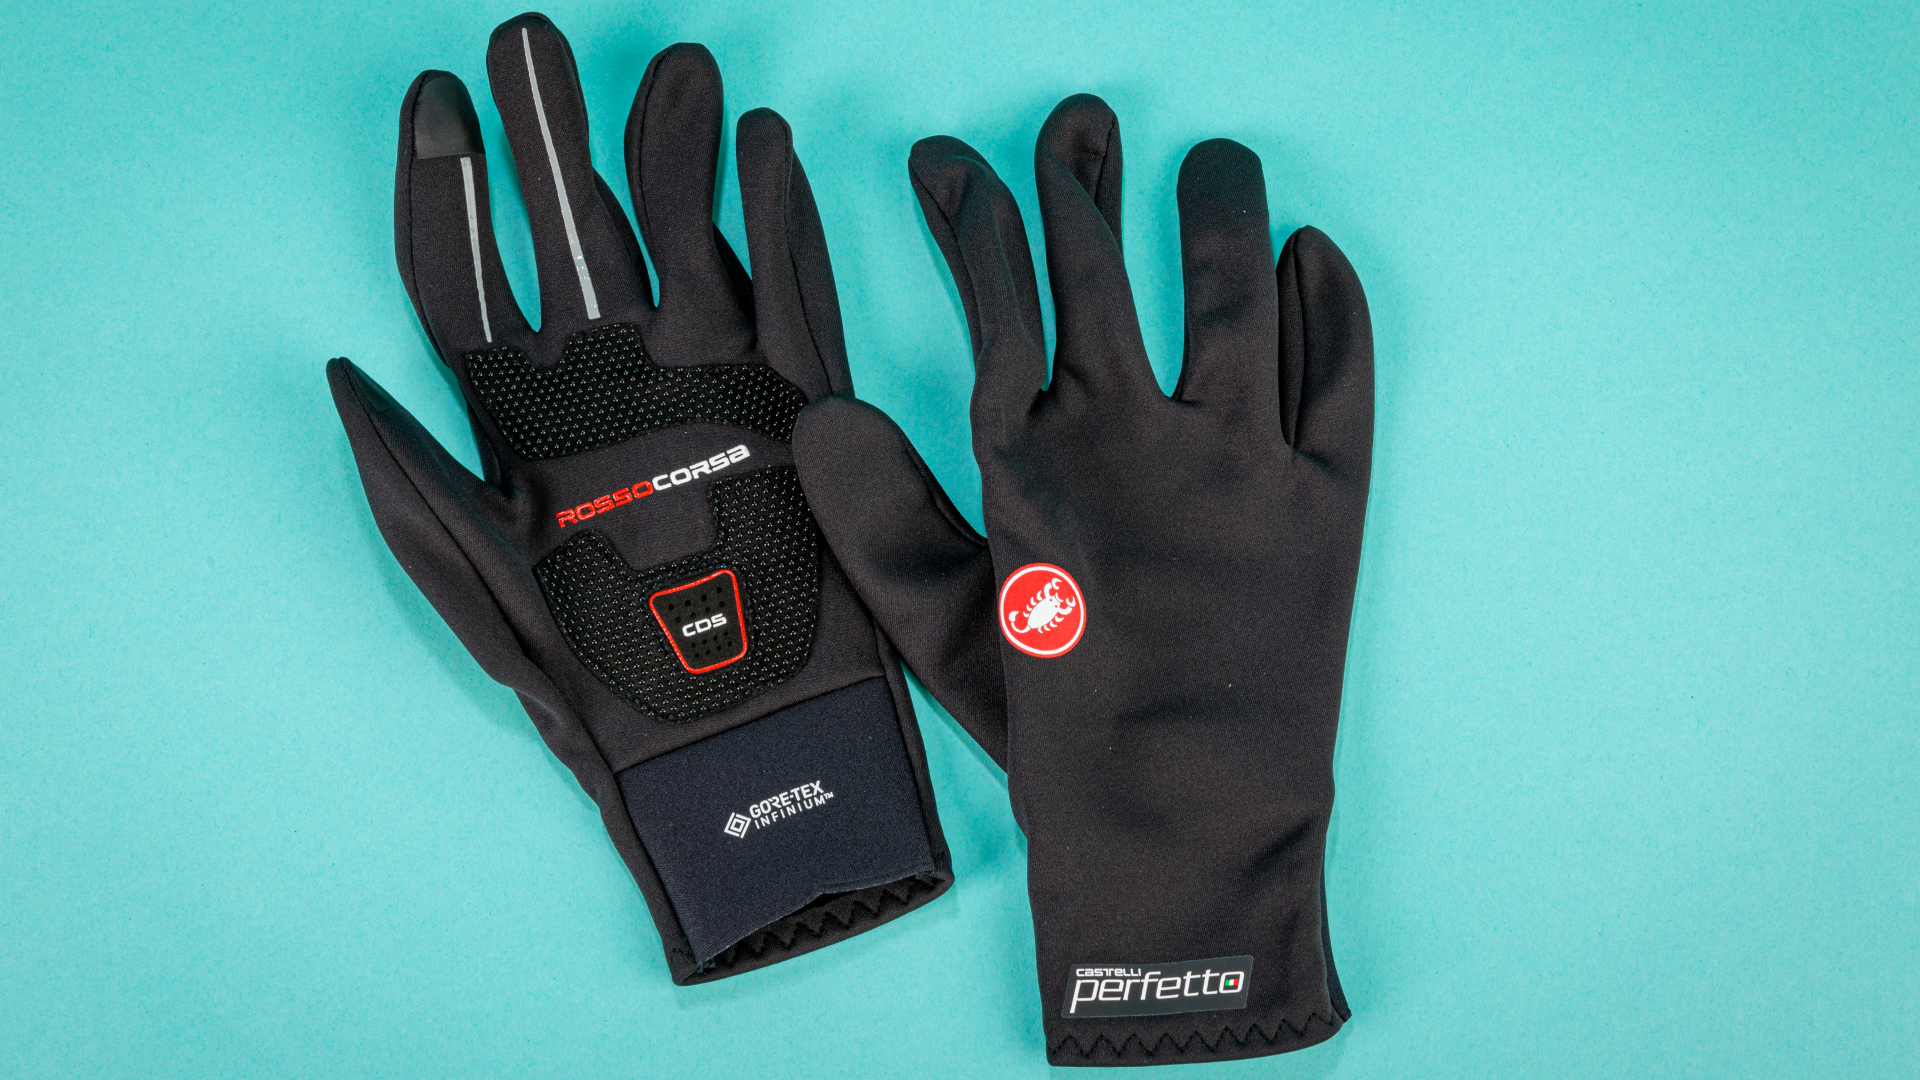 Castelli Perfetto RoS Glove review | Cycling Weekly